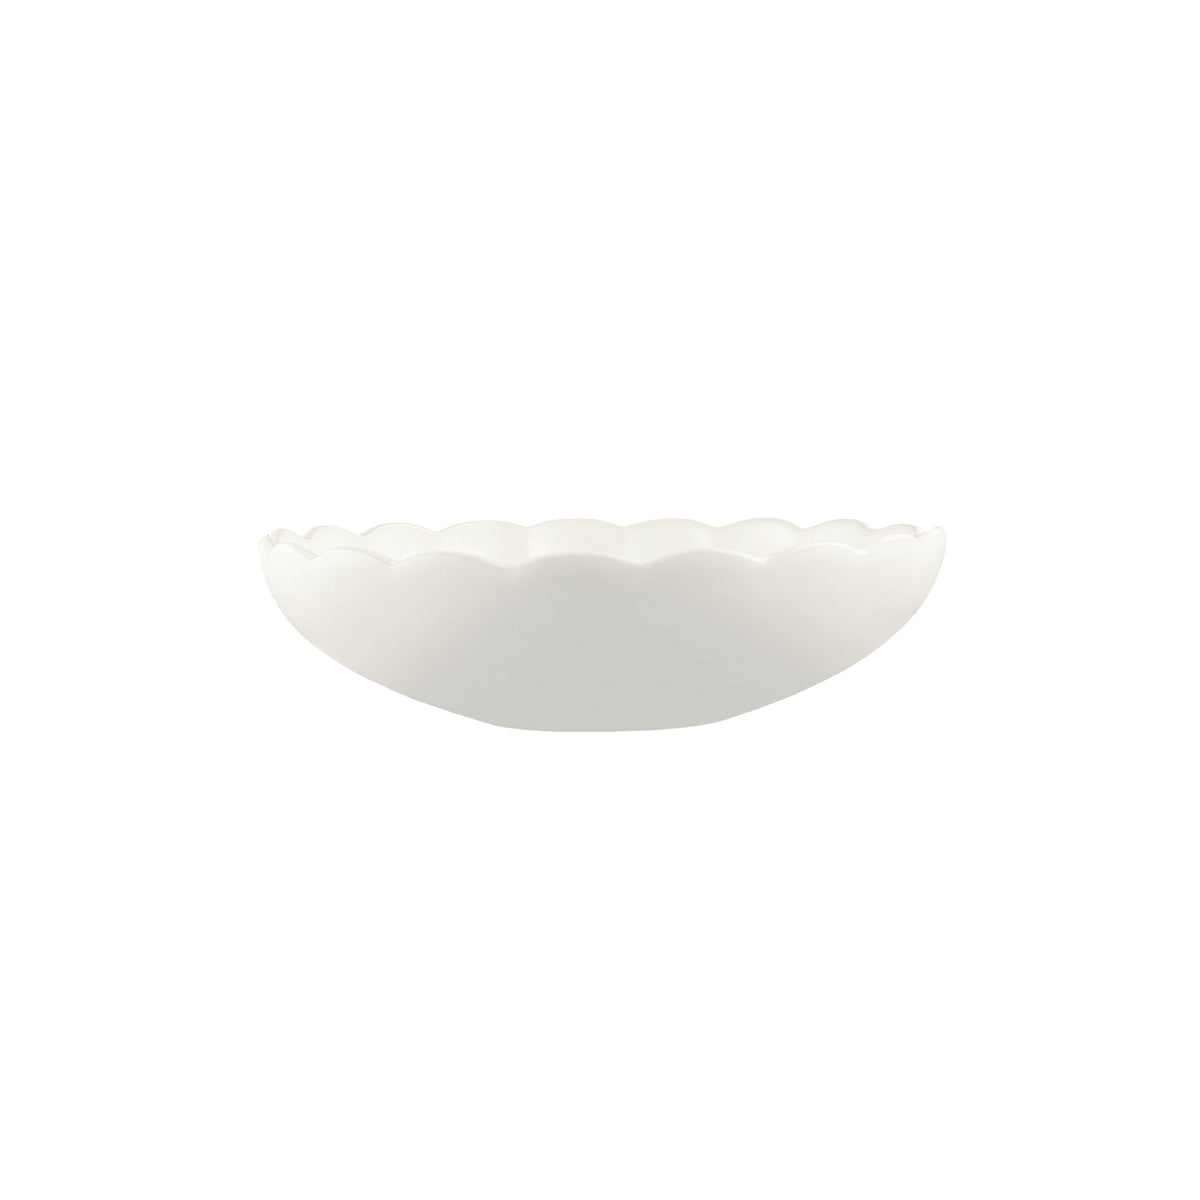 Lafayette Salad Bowl in Pearl White- Set of 4